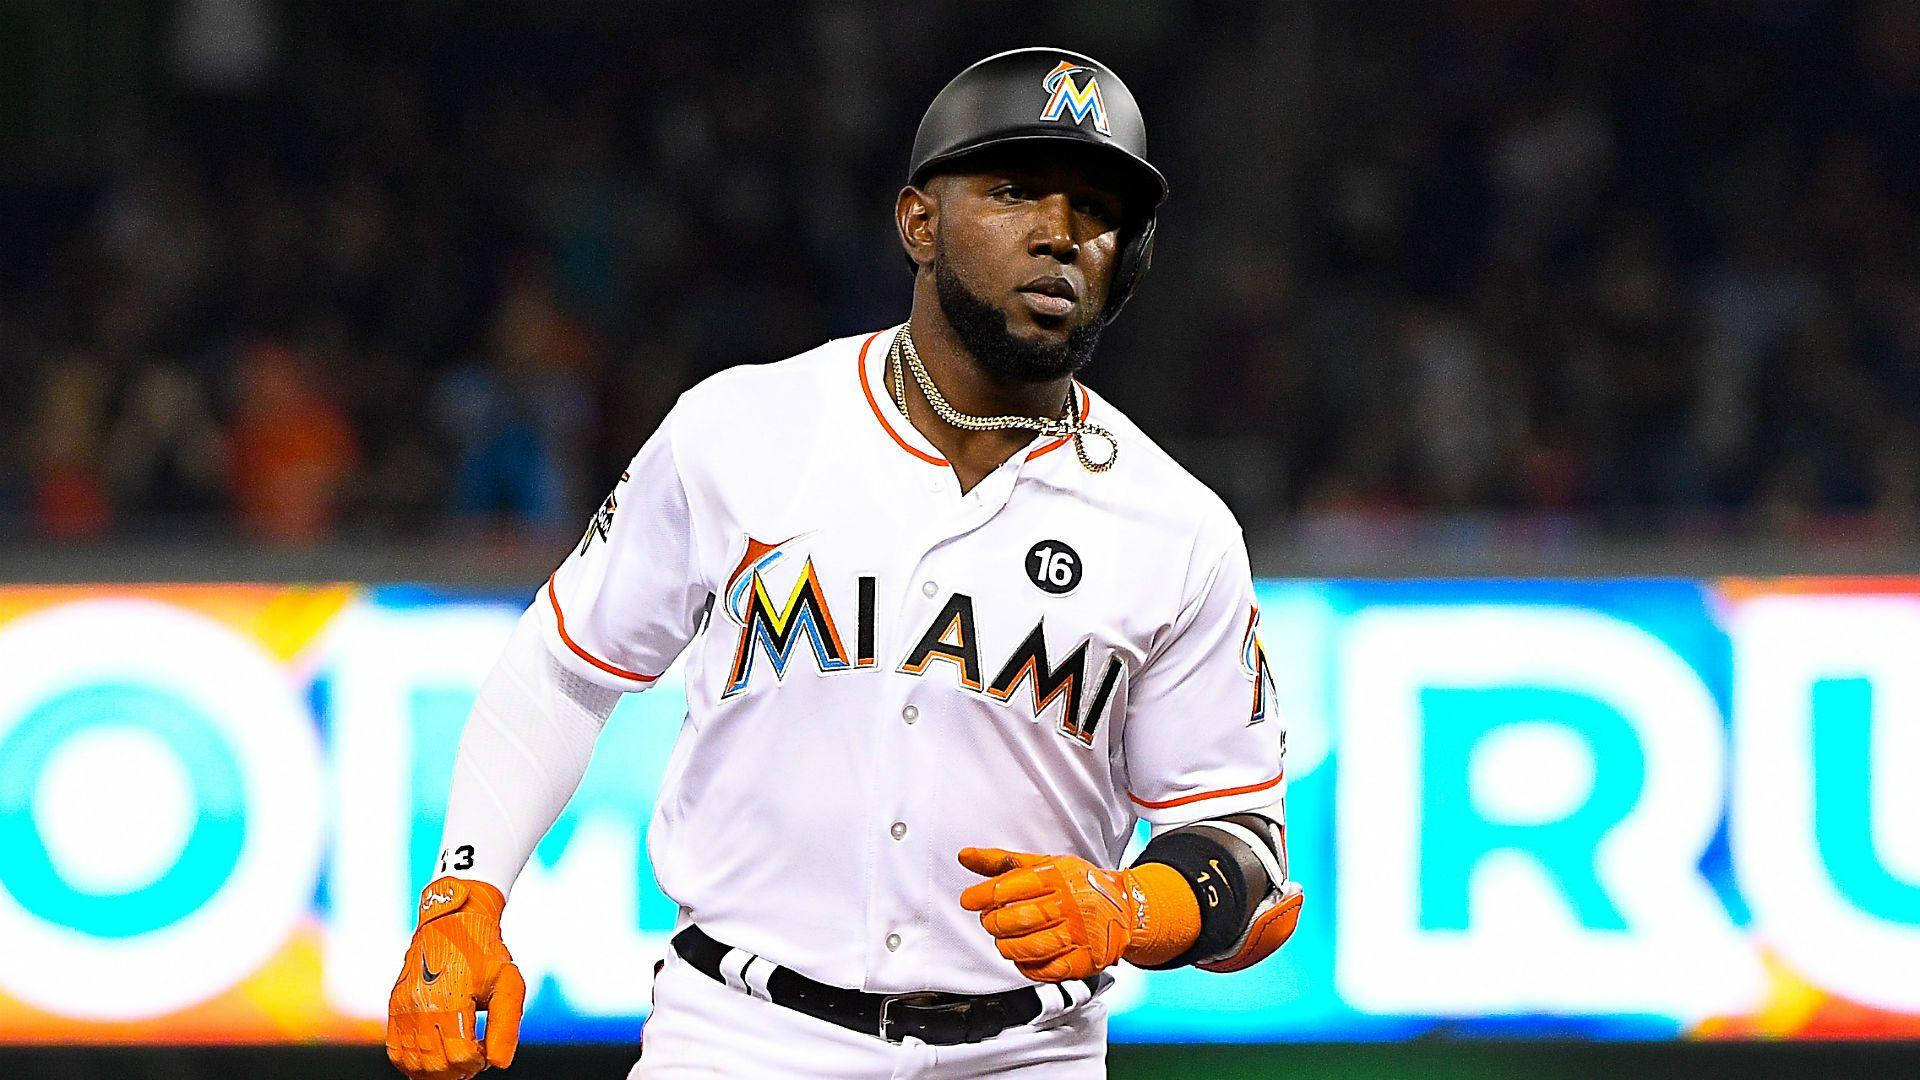 Serious Marcell Ozuna With Bright Billboard Wallpaper